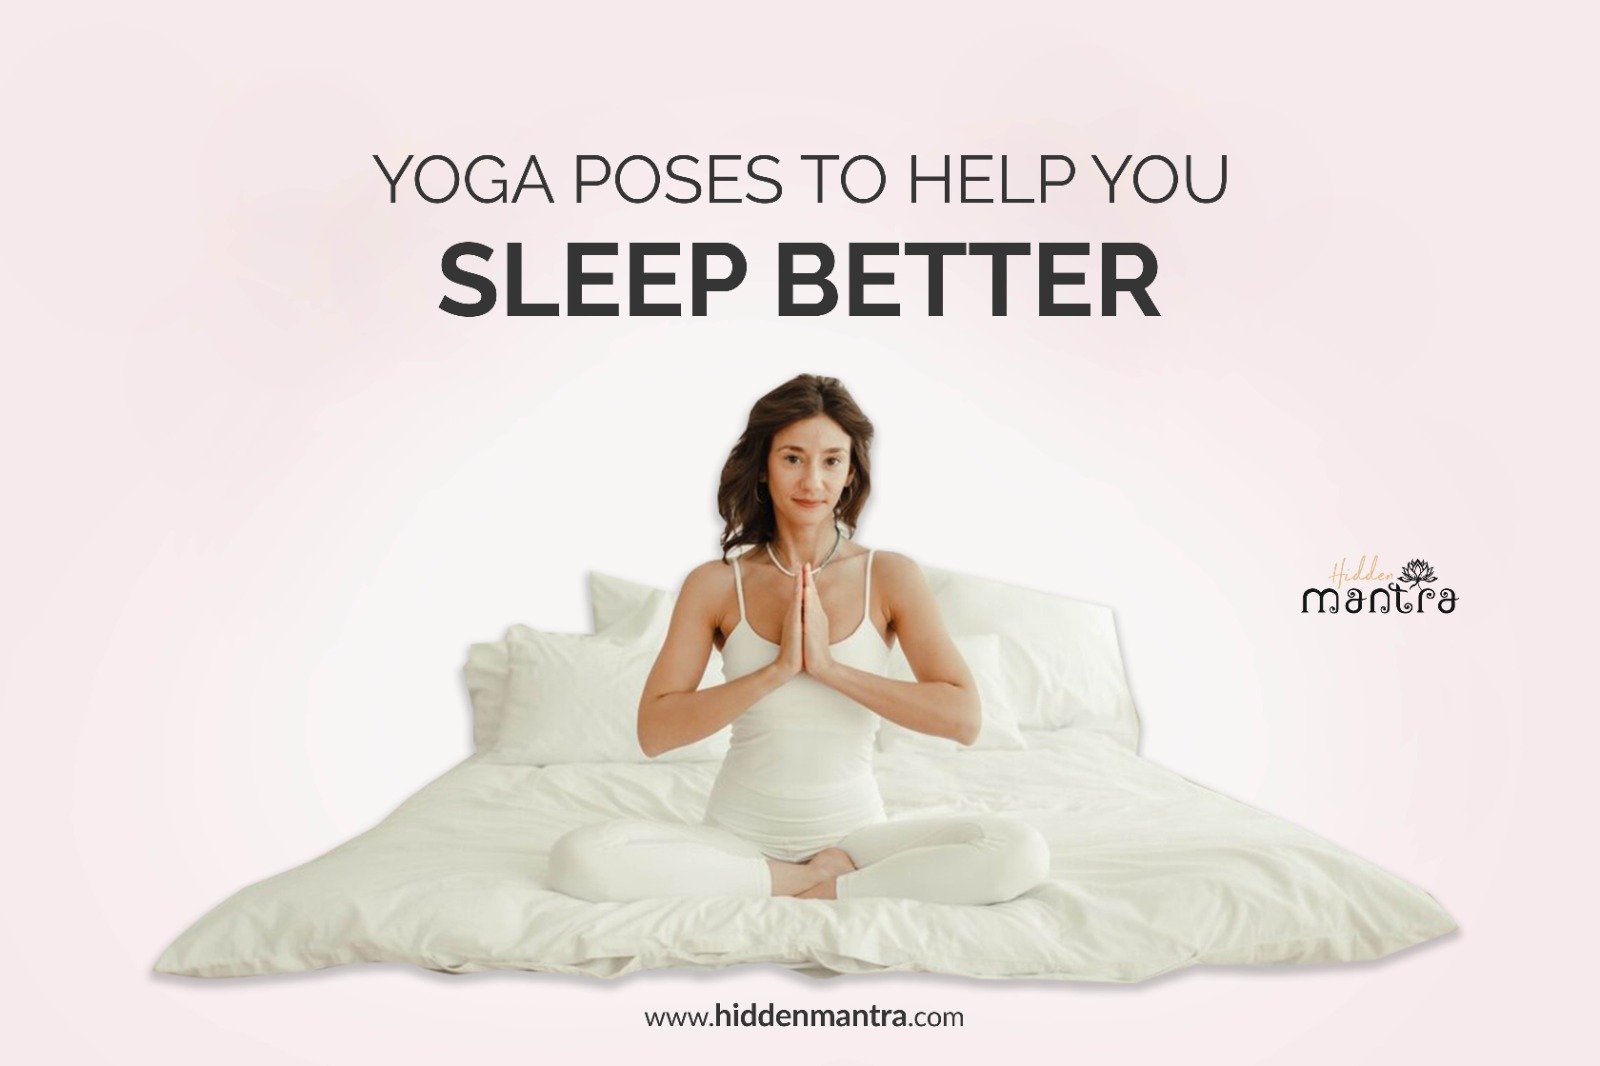 How To Sleep Fast in 5 Minutes With Yoga